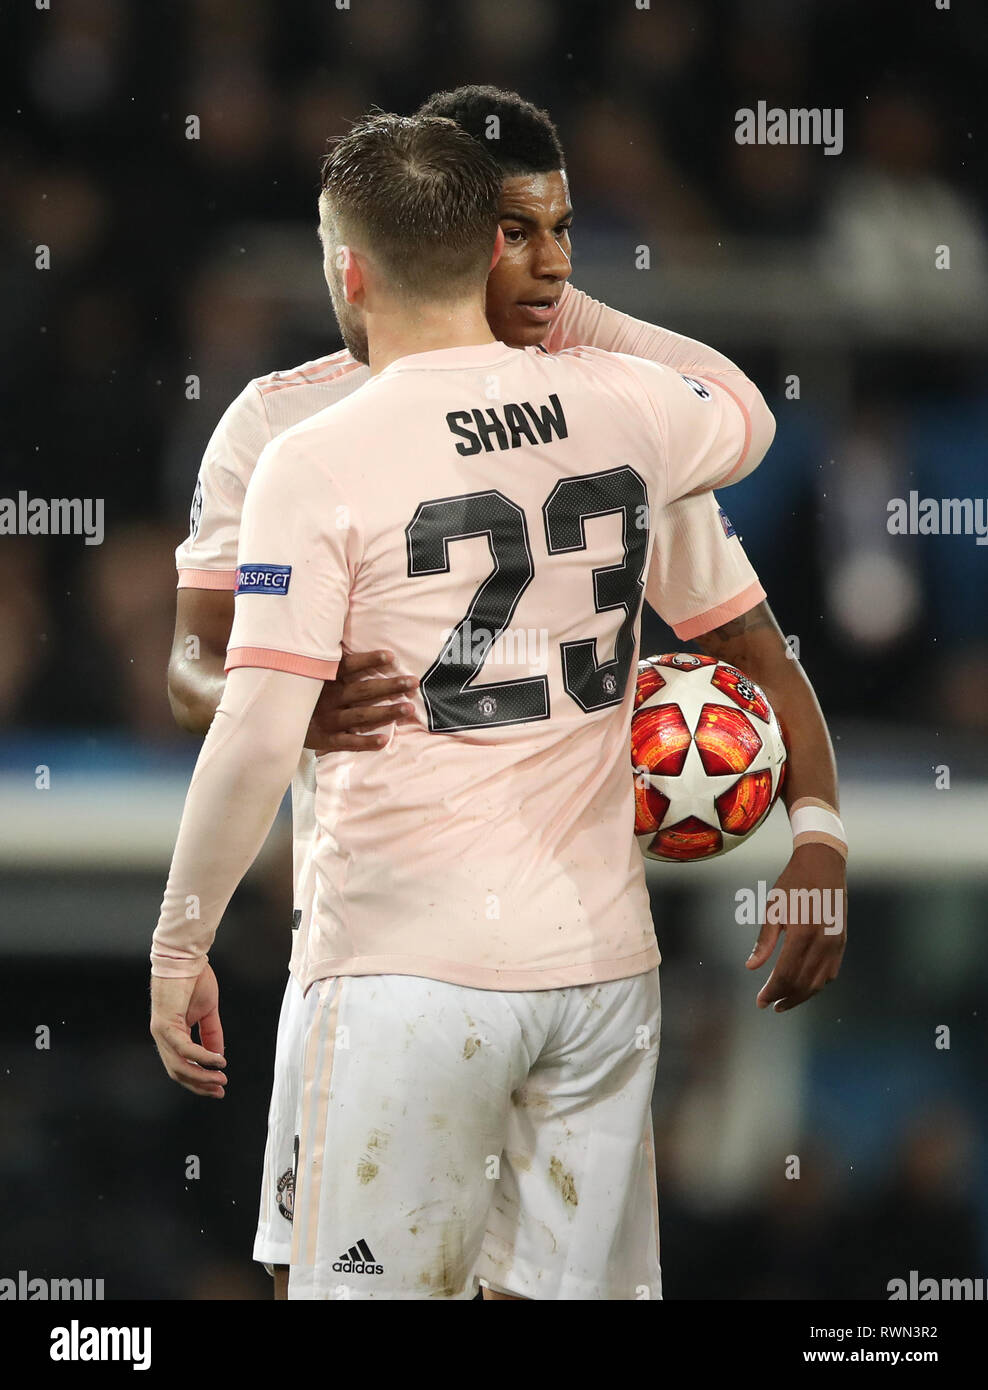 Manchester United's Marcus Rashford (back) and Luke Shaw speak prior to taking a penalty during the UEFA Champions League match at the Parc des Princes, Paris, France. Stock Photo